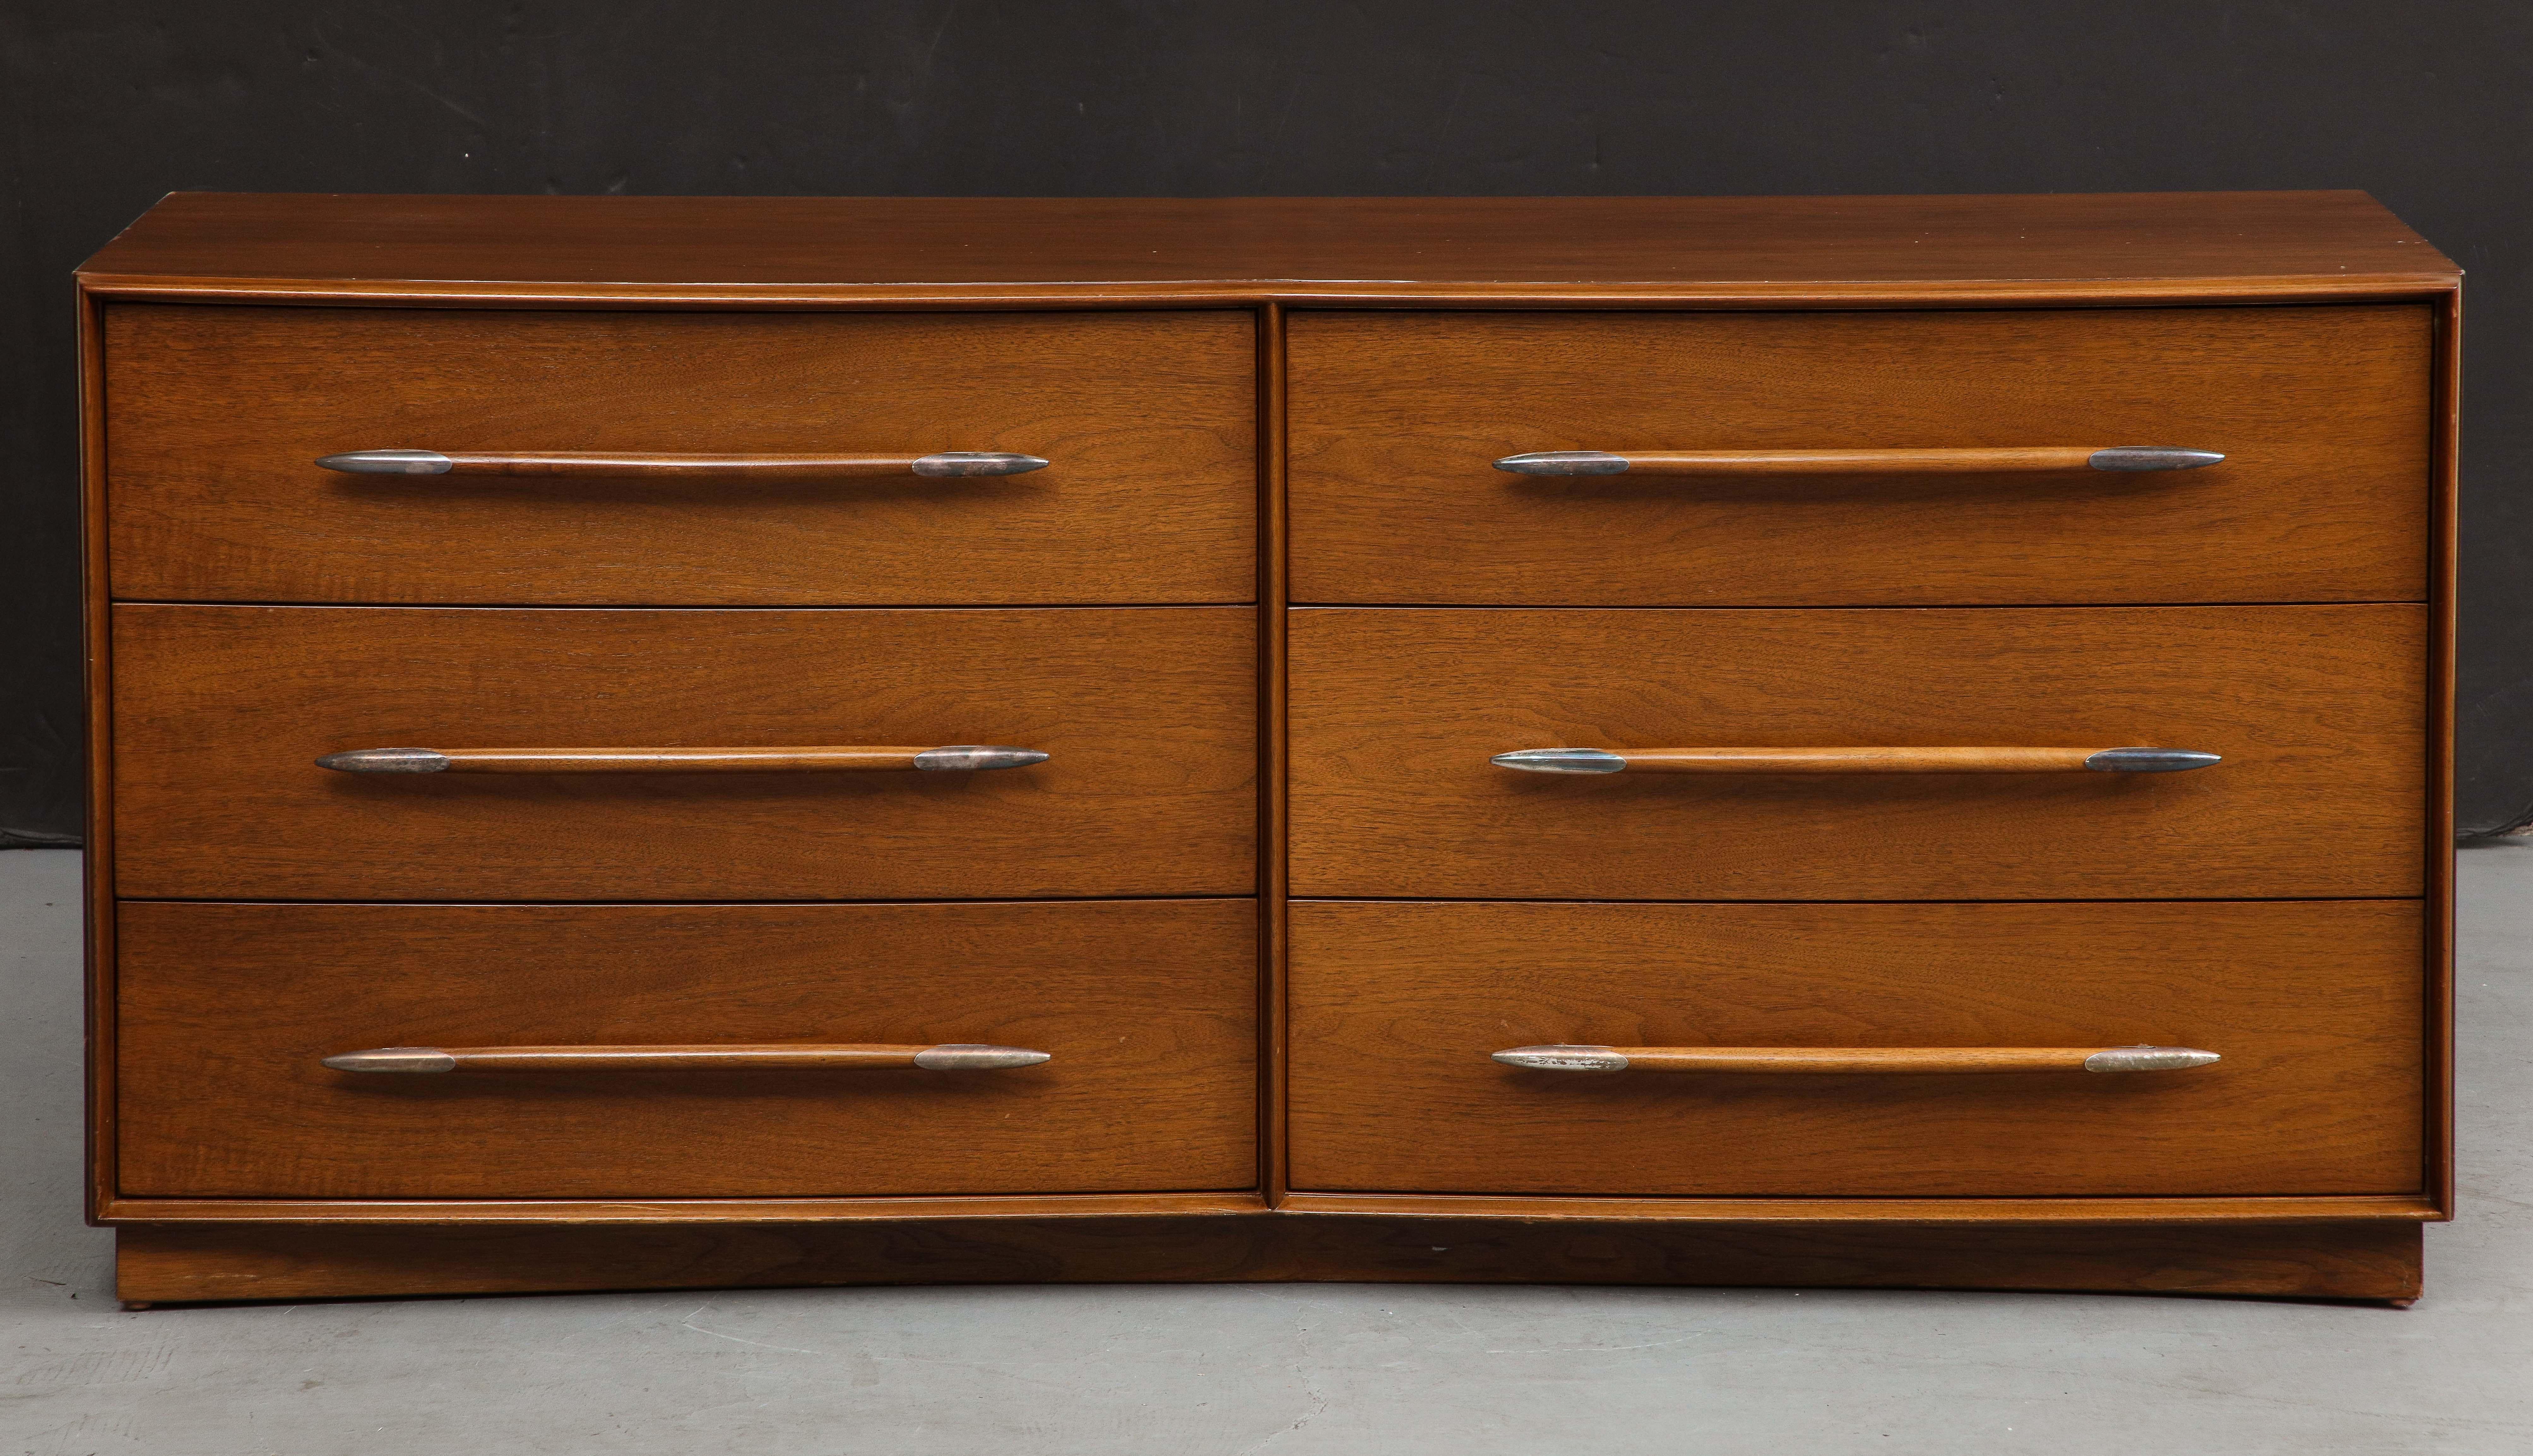 Midcentury walnut dresser, featuring six deep drawers and spear-shaped carved walnut pulls with nickel-tipped ends. 

Designed by T.H. Robsjohn-Gibbings for The Widdicomb Furniture Company, 1950s. 

30